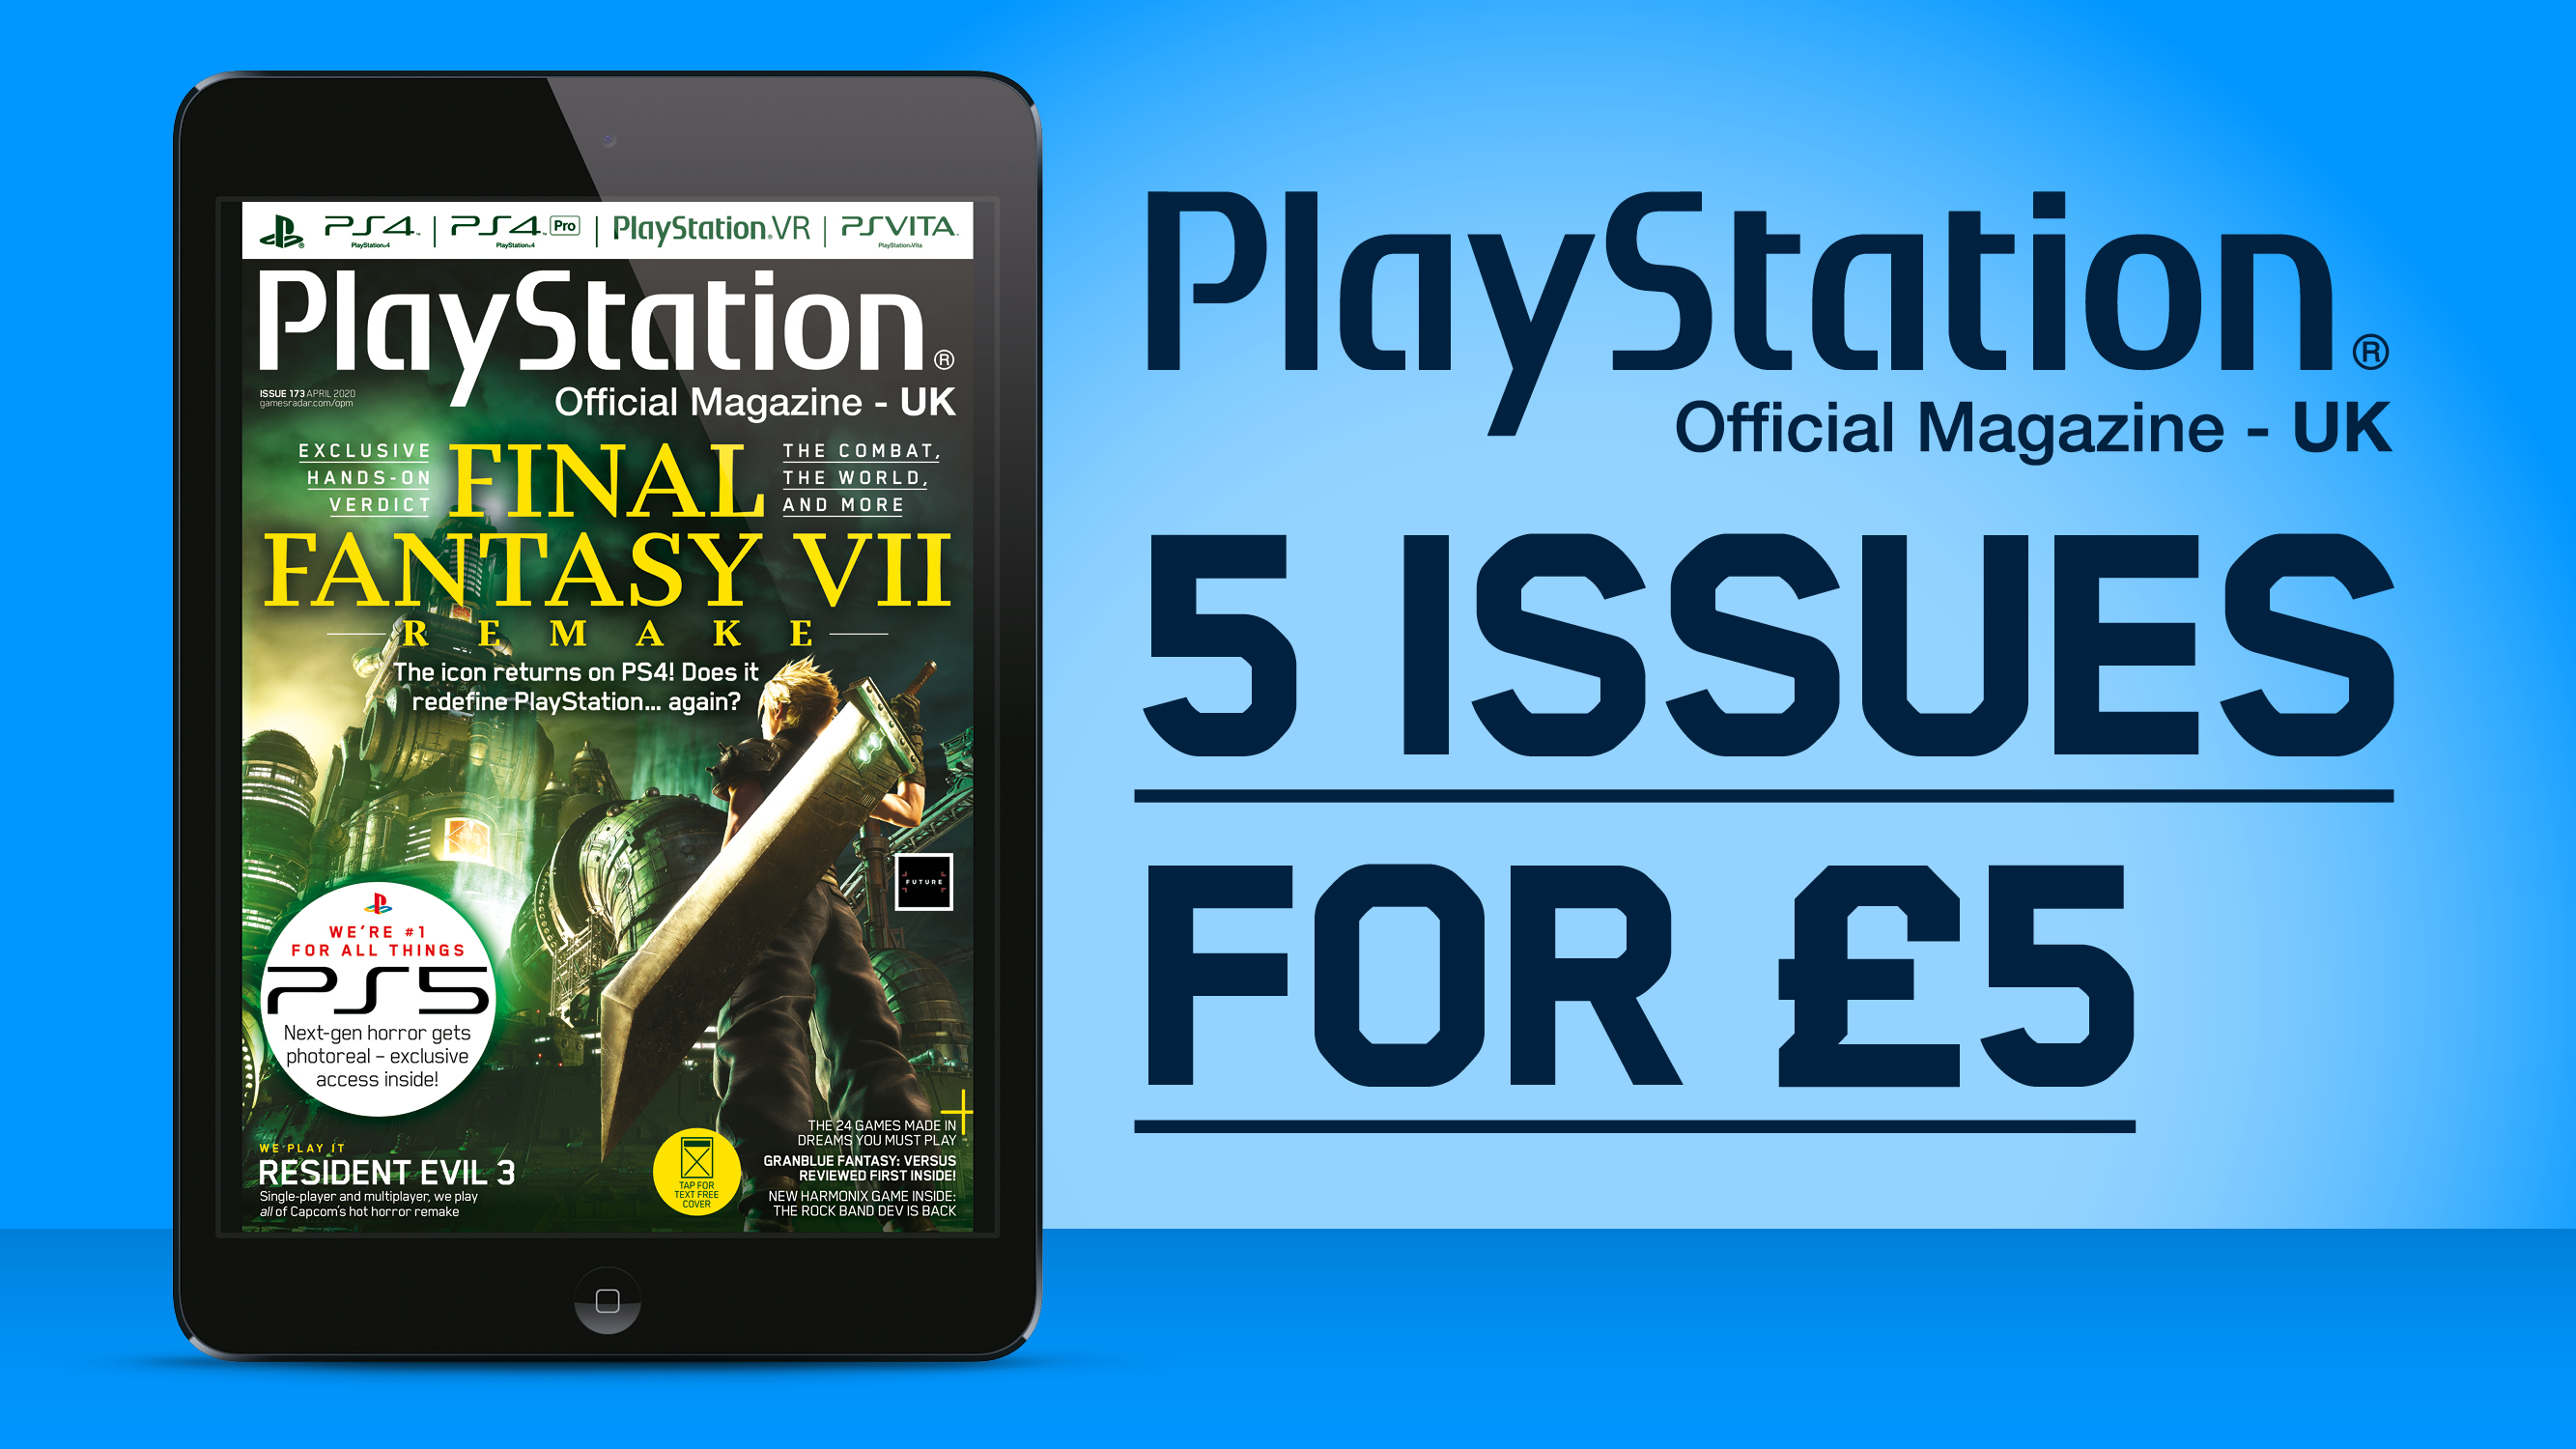 Spending time at home? Get five issues of Official PlayStation Magazine for £5 with a digital subscription